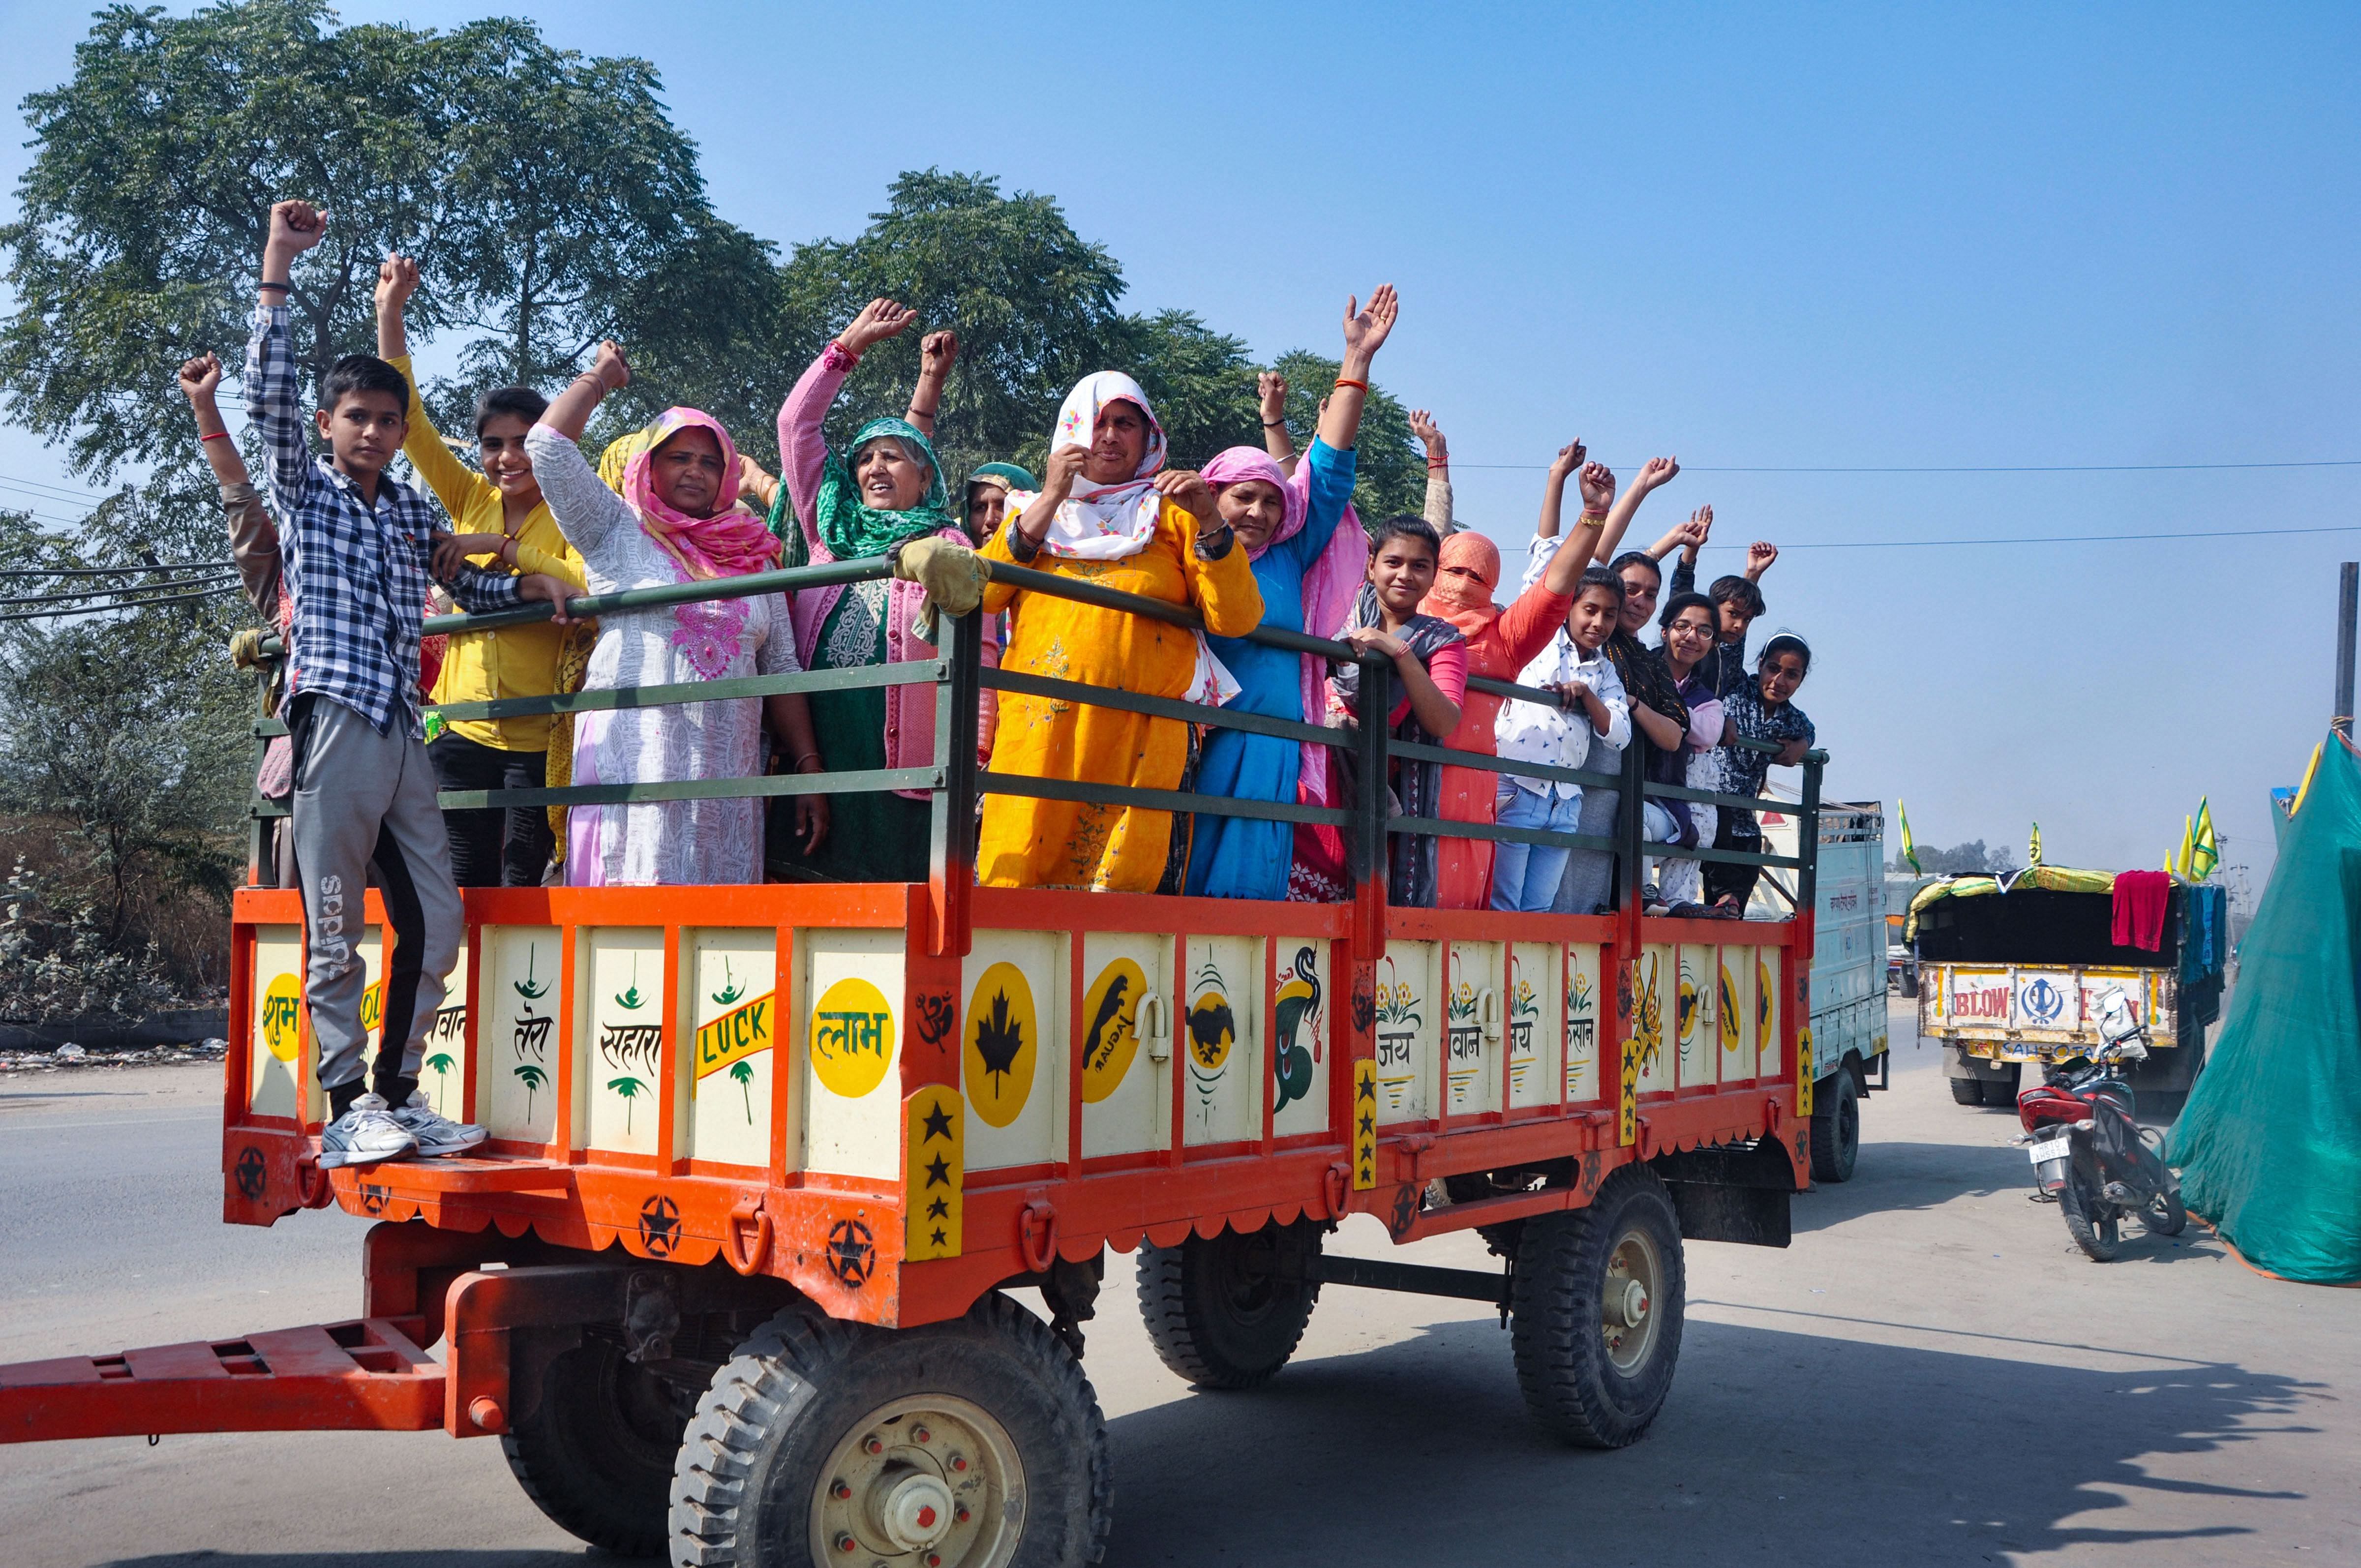 Women and children ride a tractor on their way to take part in farmers' protest against farm reform laws at Singhu border, in Sonipat district, Wednesday, Feb. 10, 2021. Credit: PTI Photo